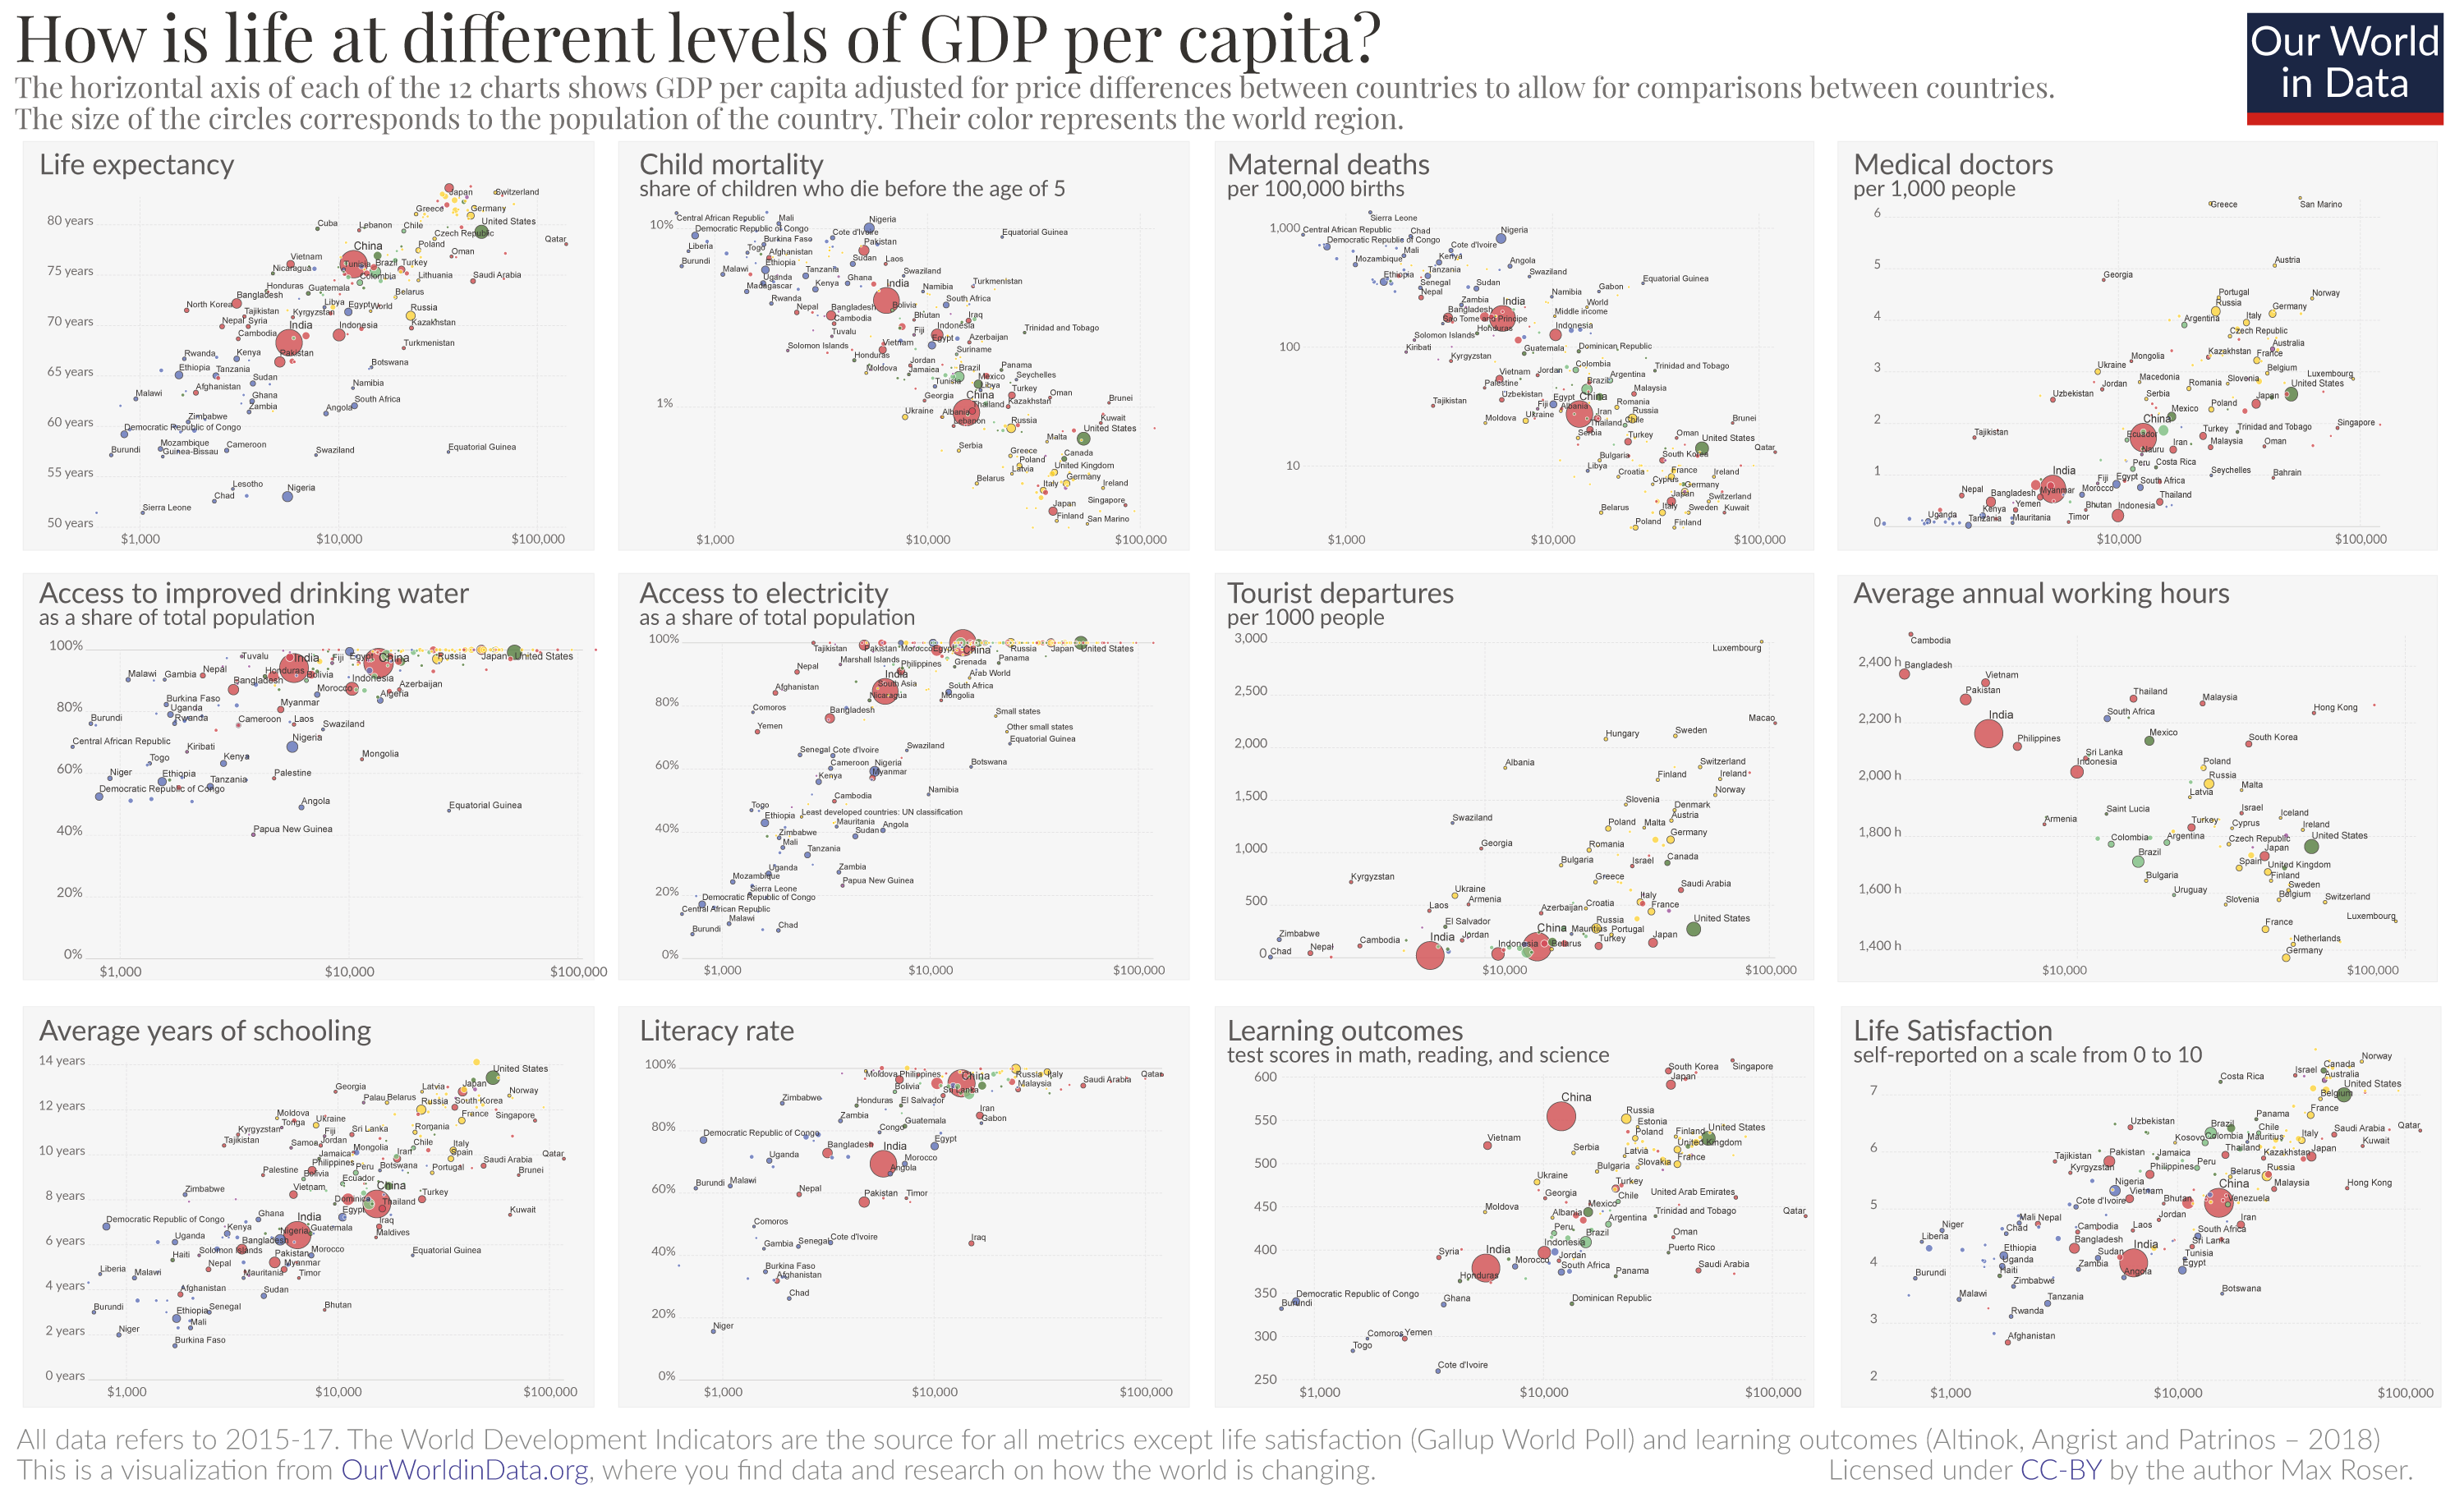 Correlates of gdp – how is life at different levels of income